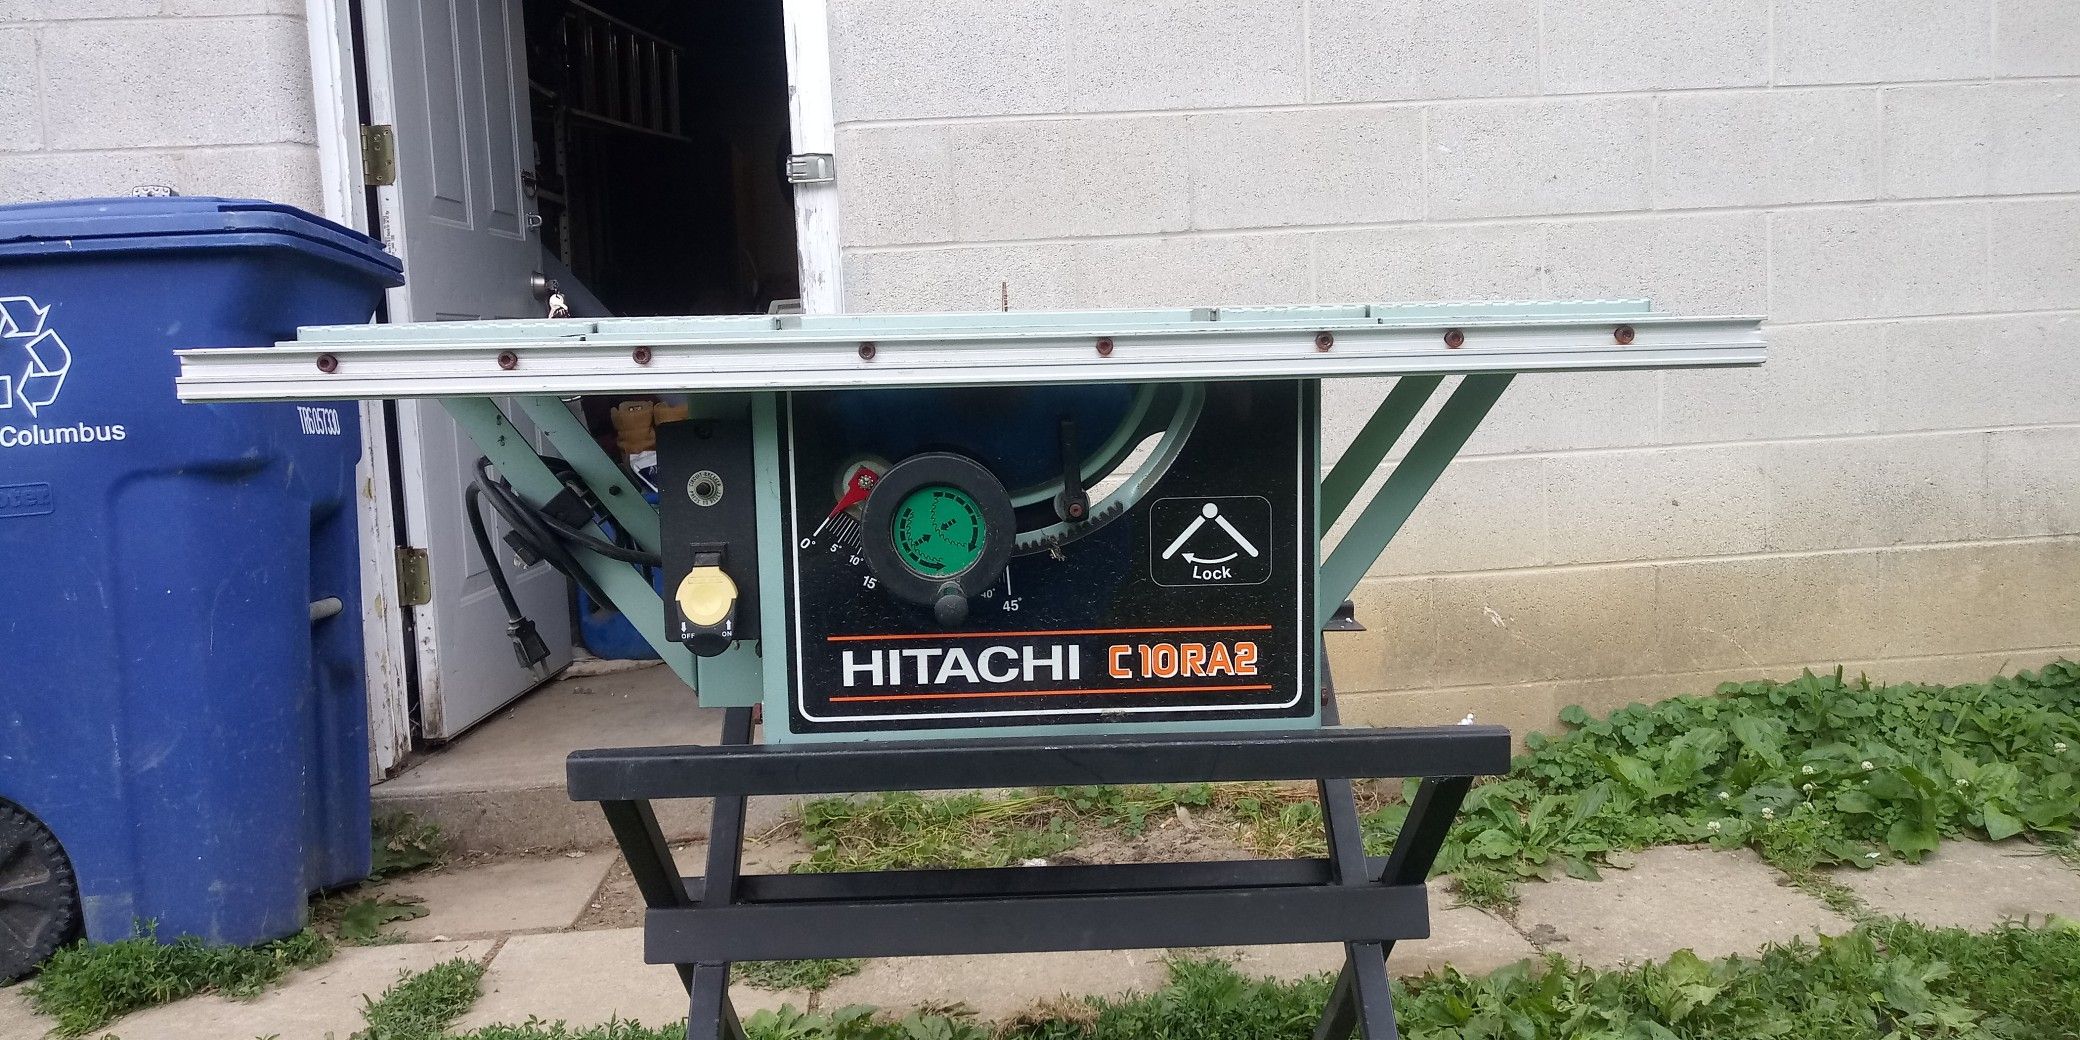 Hitachi table saw 10 inch blade.. Make me an offer.